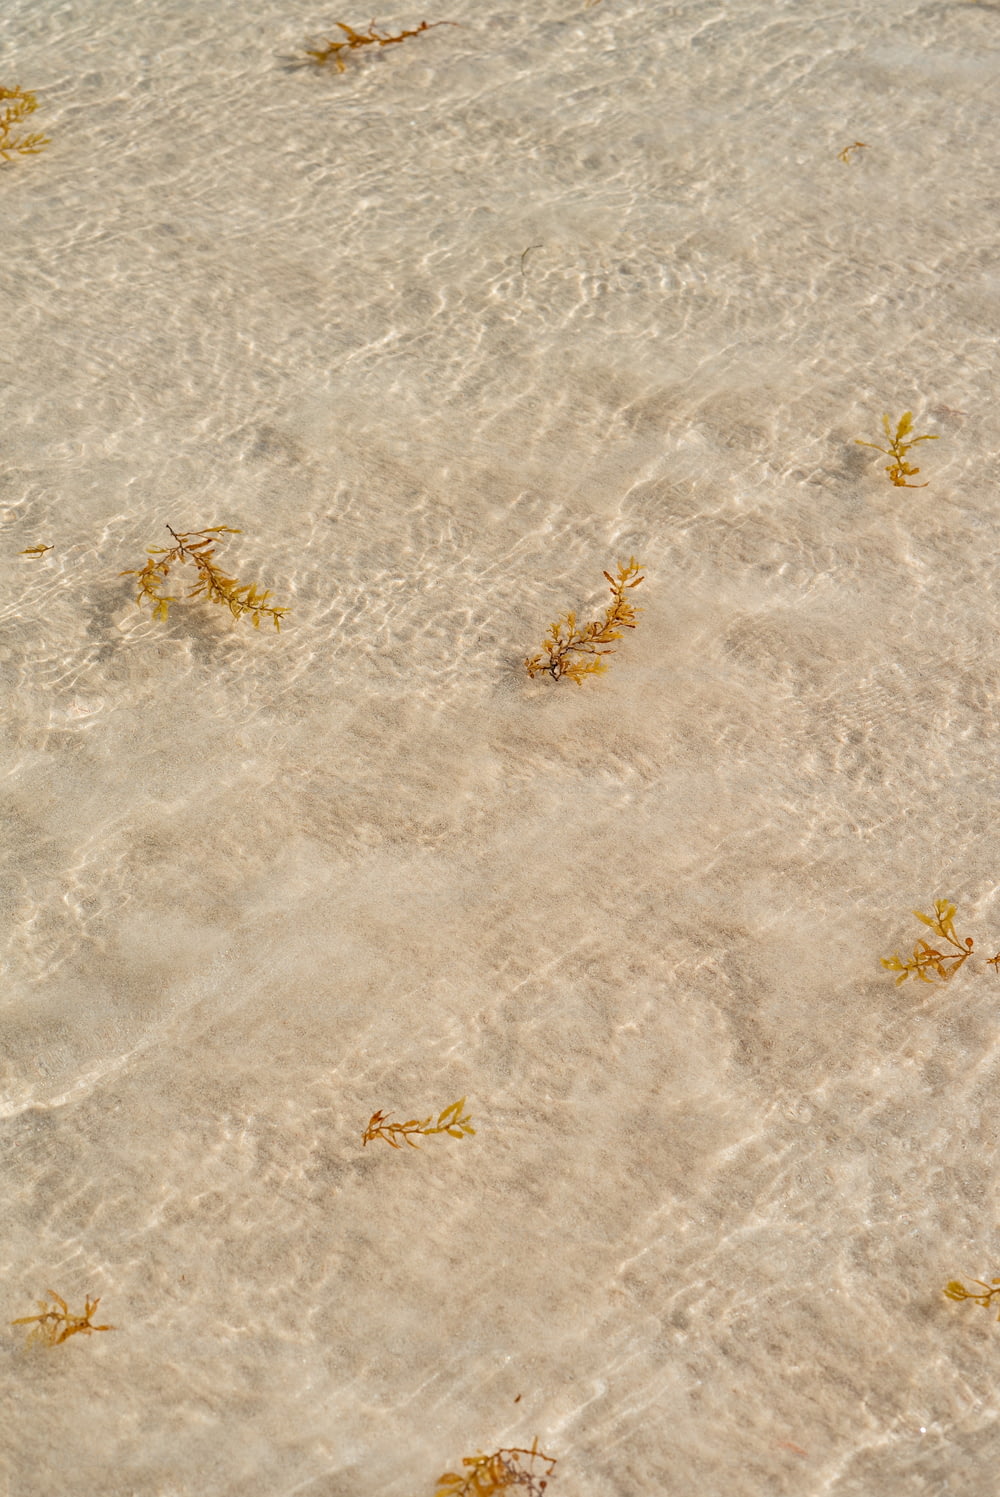 a group of seaweed floating on top of a sandy beach